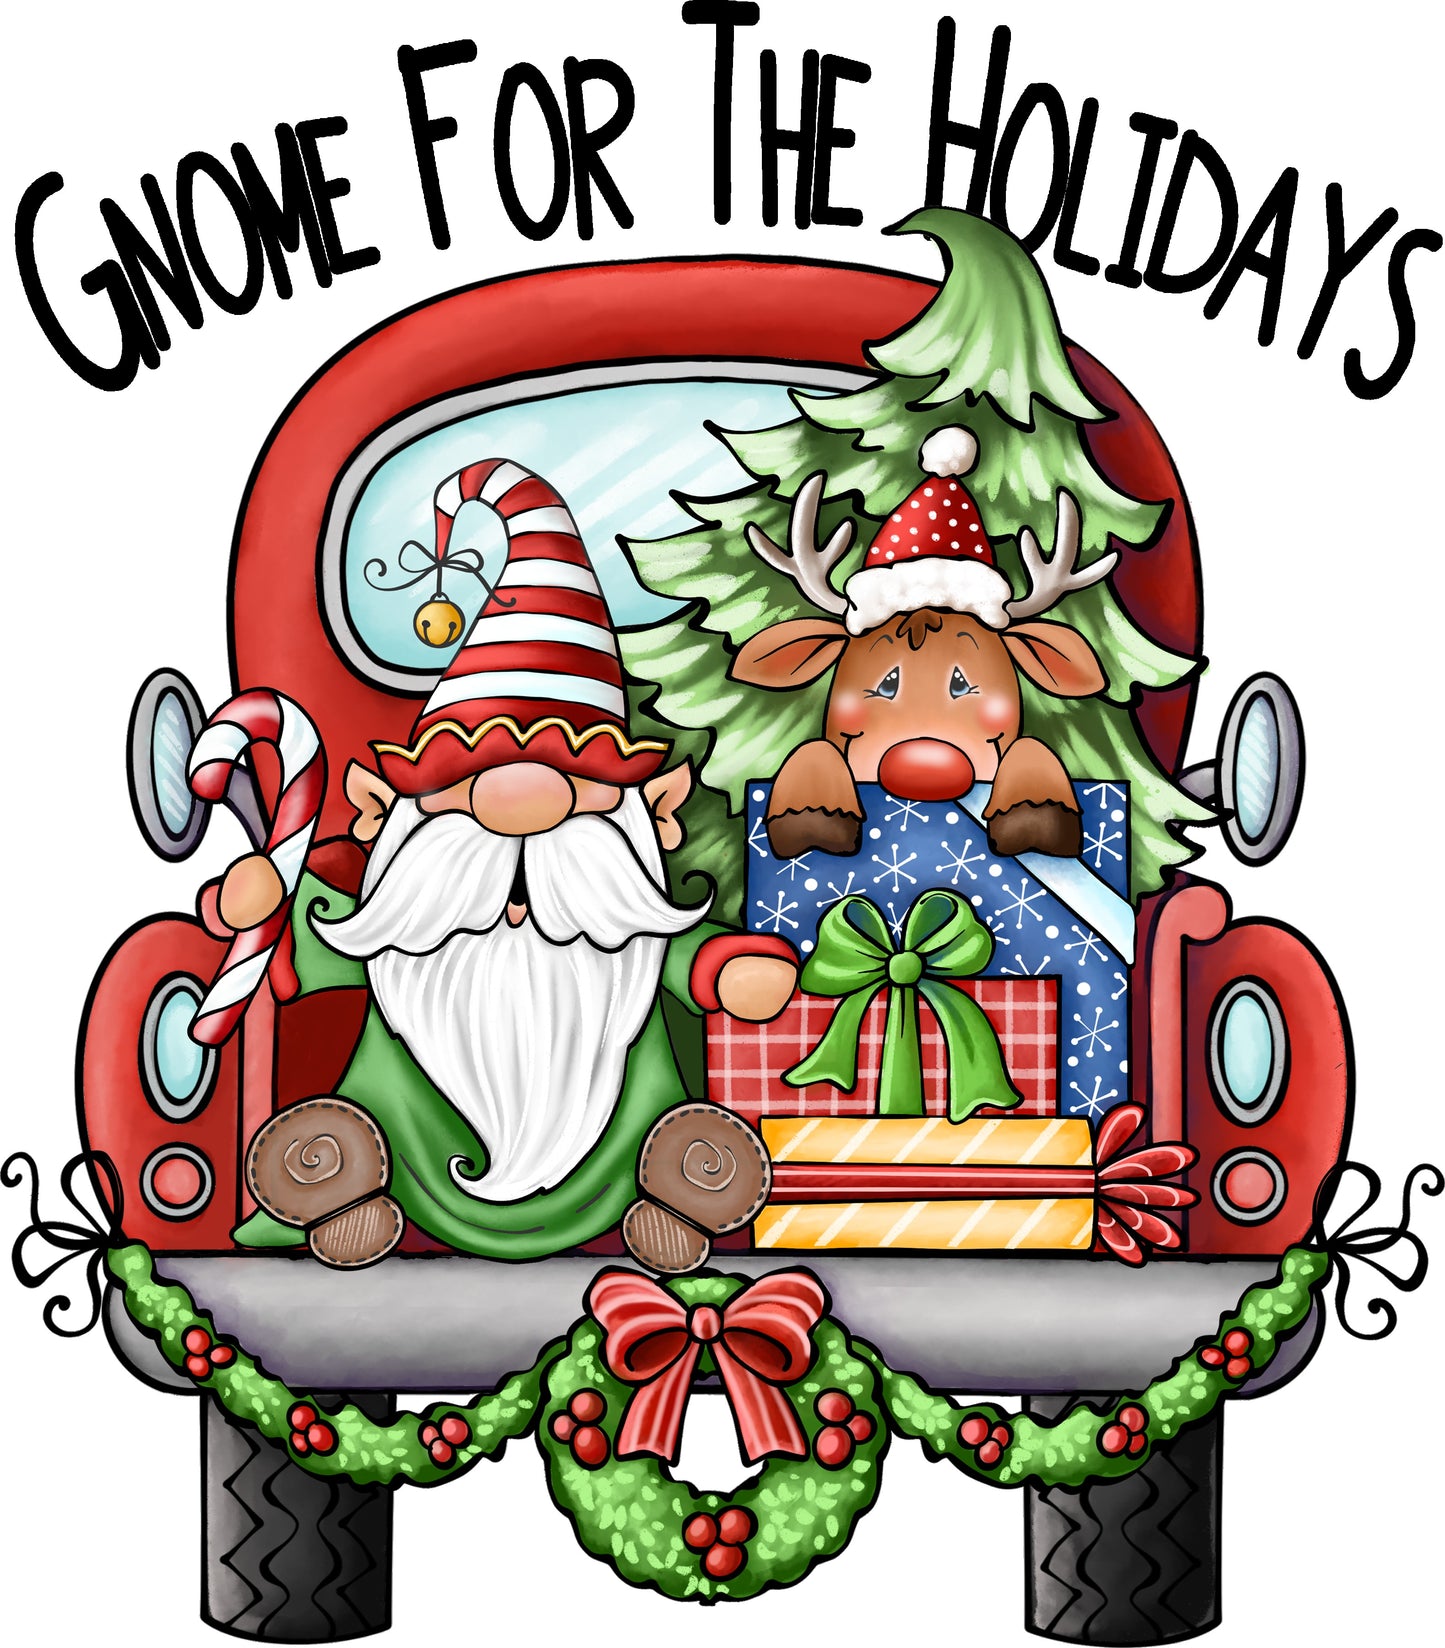 Gnome for the Holidays - Out of the Wood